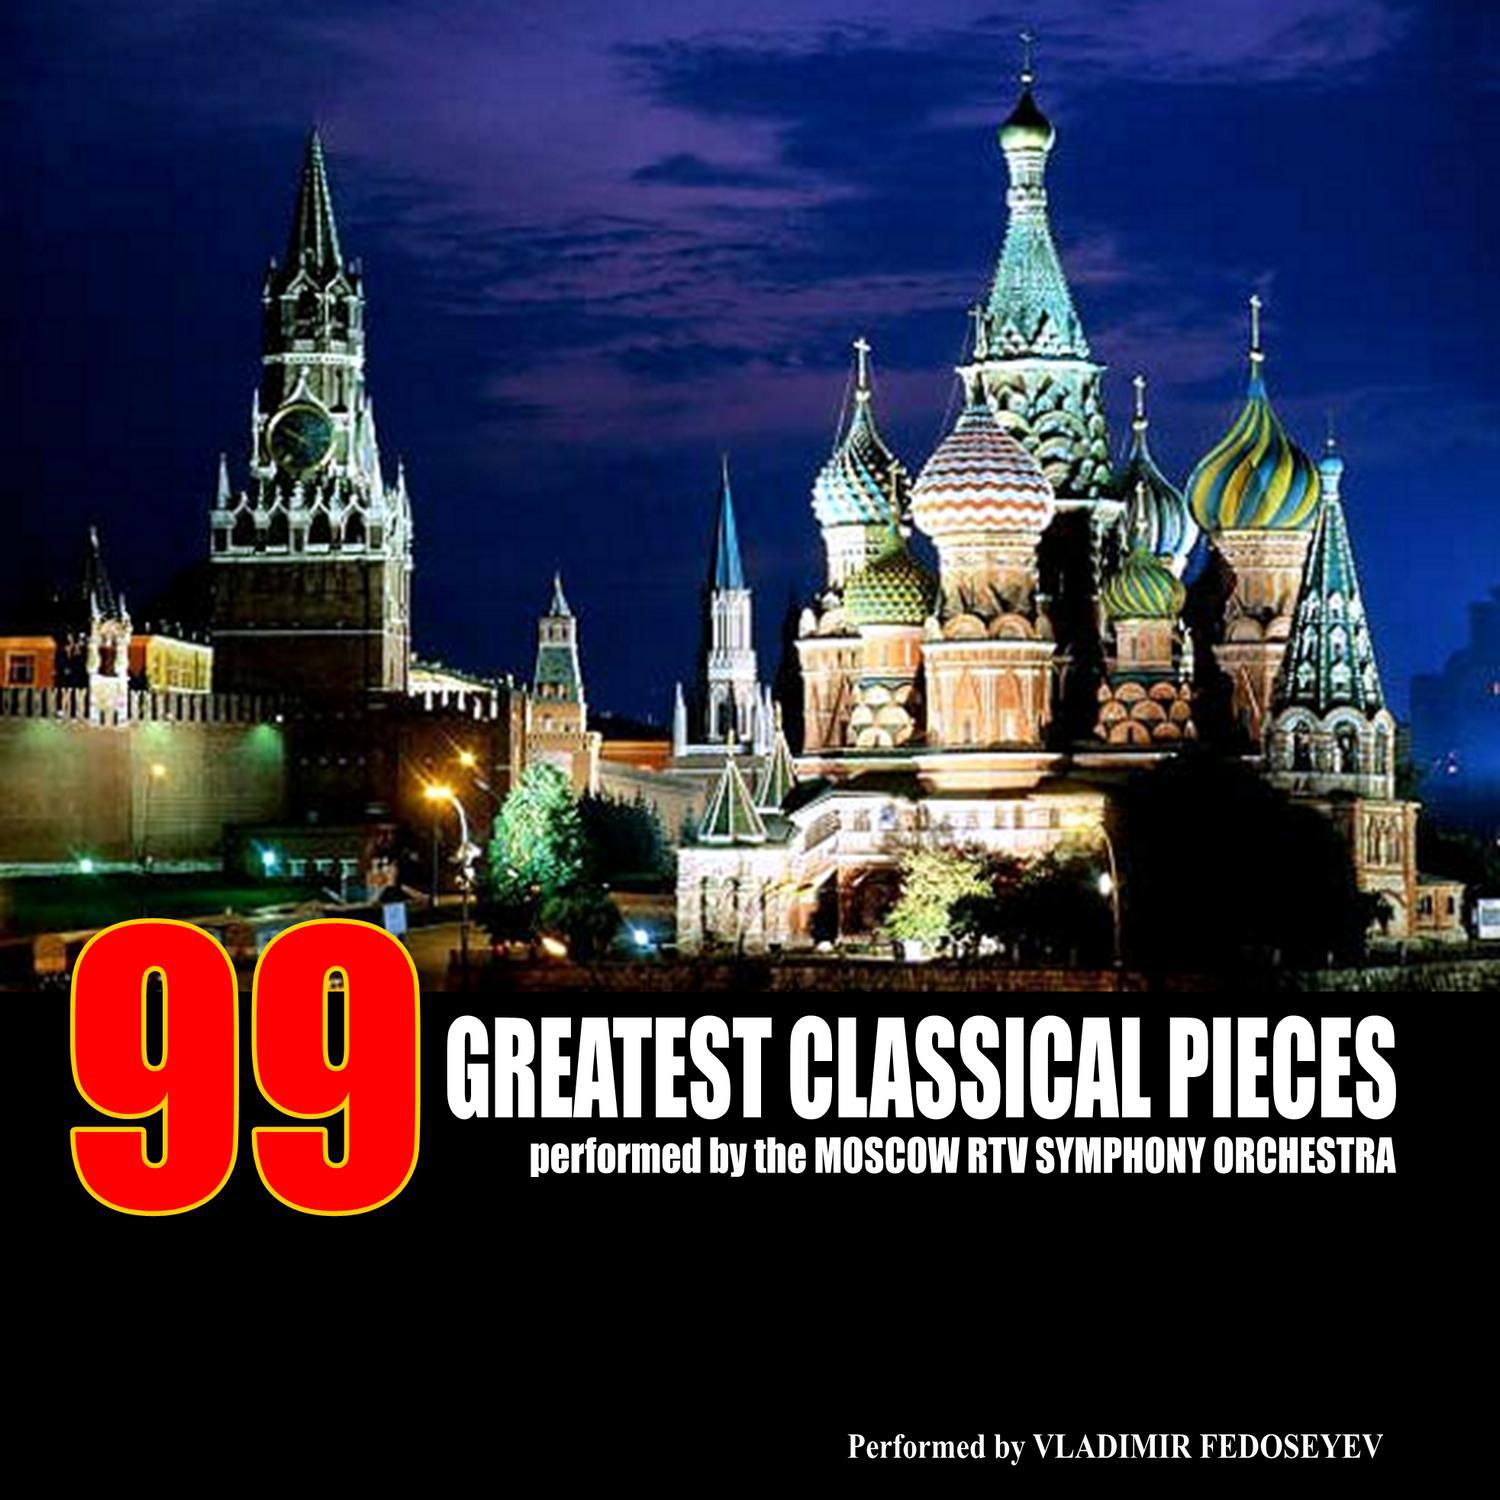 99 Greatest Classical Pieces by the Moscow RTV Symphony Orchestra